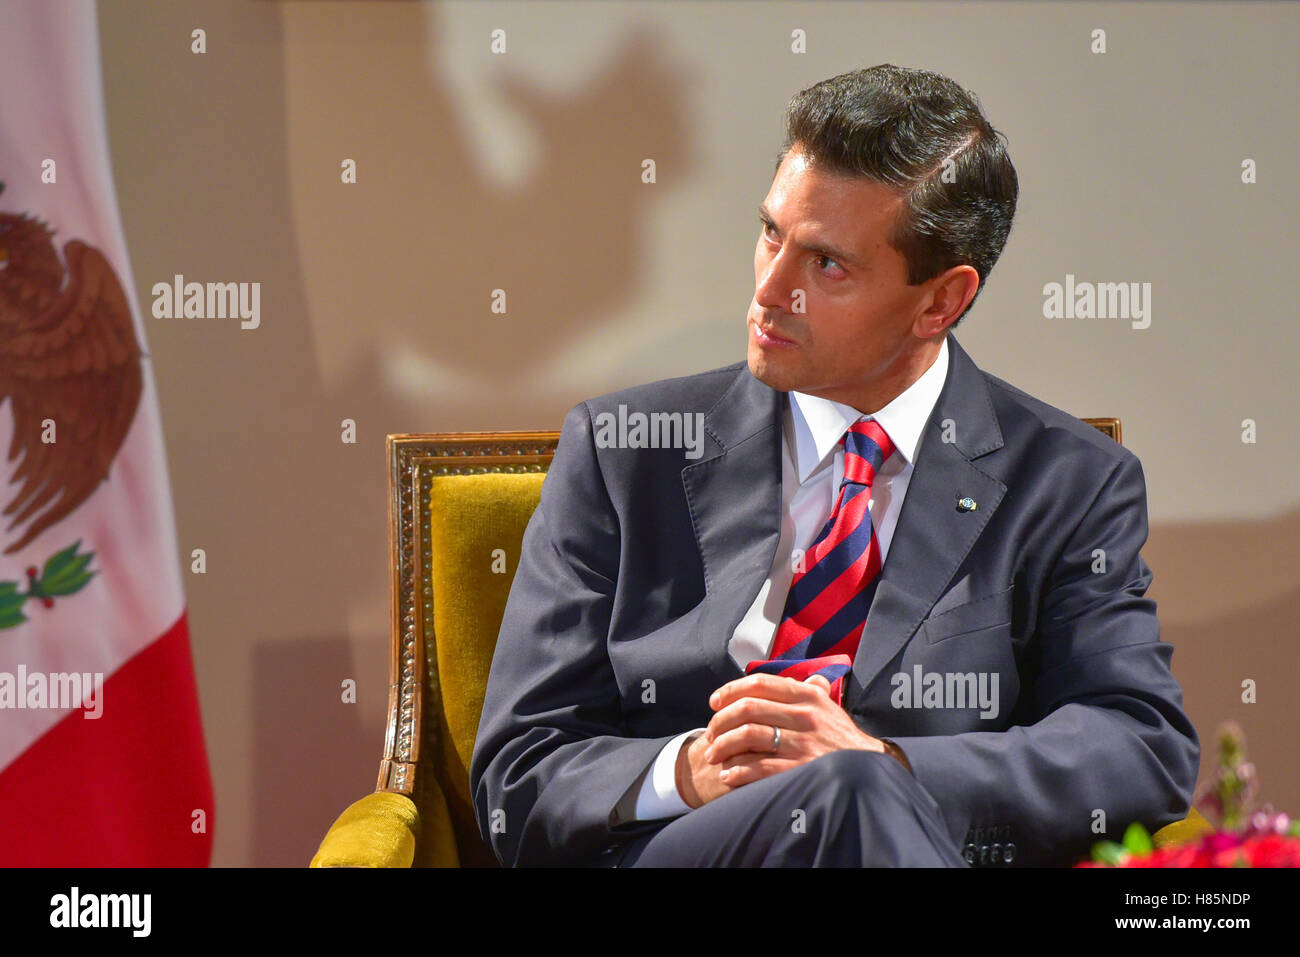 Buenos Aires, Argentina. 29 Jul, 2016. The President of Mexico Enrique Pena Nieto during a visit to Argentina. Stock Photo